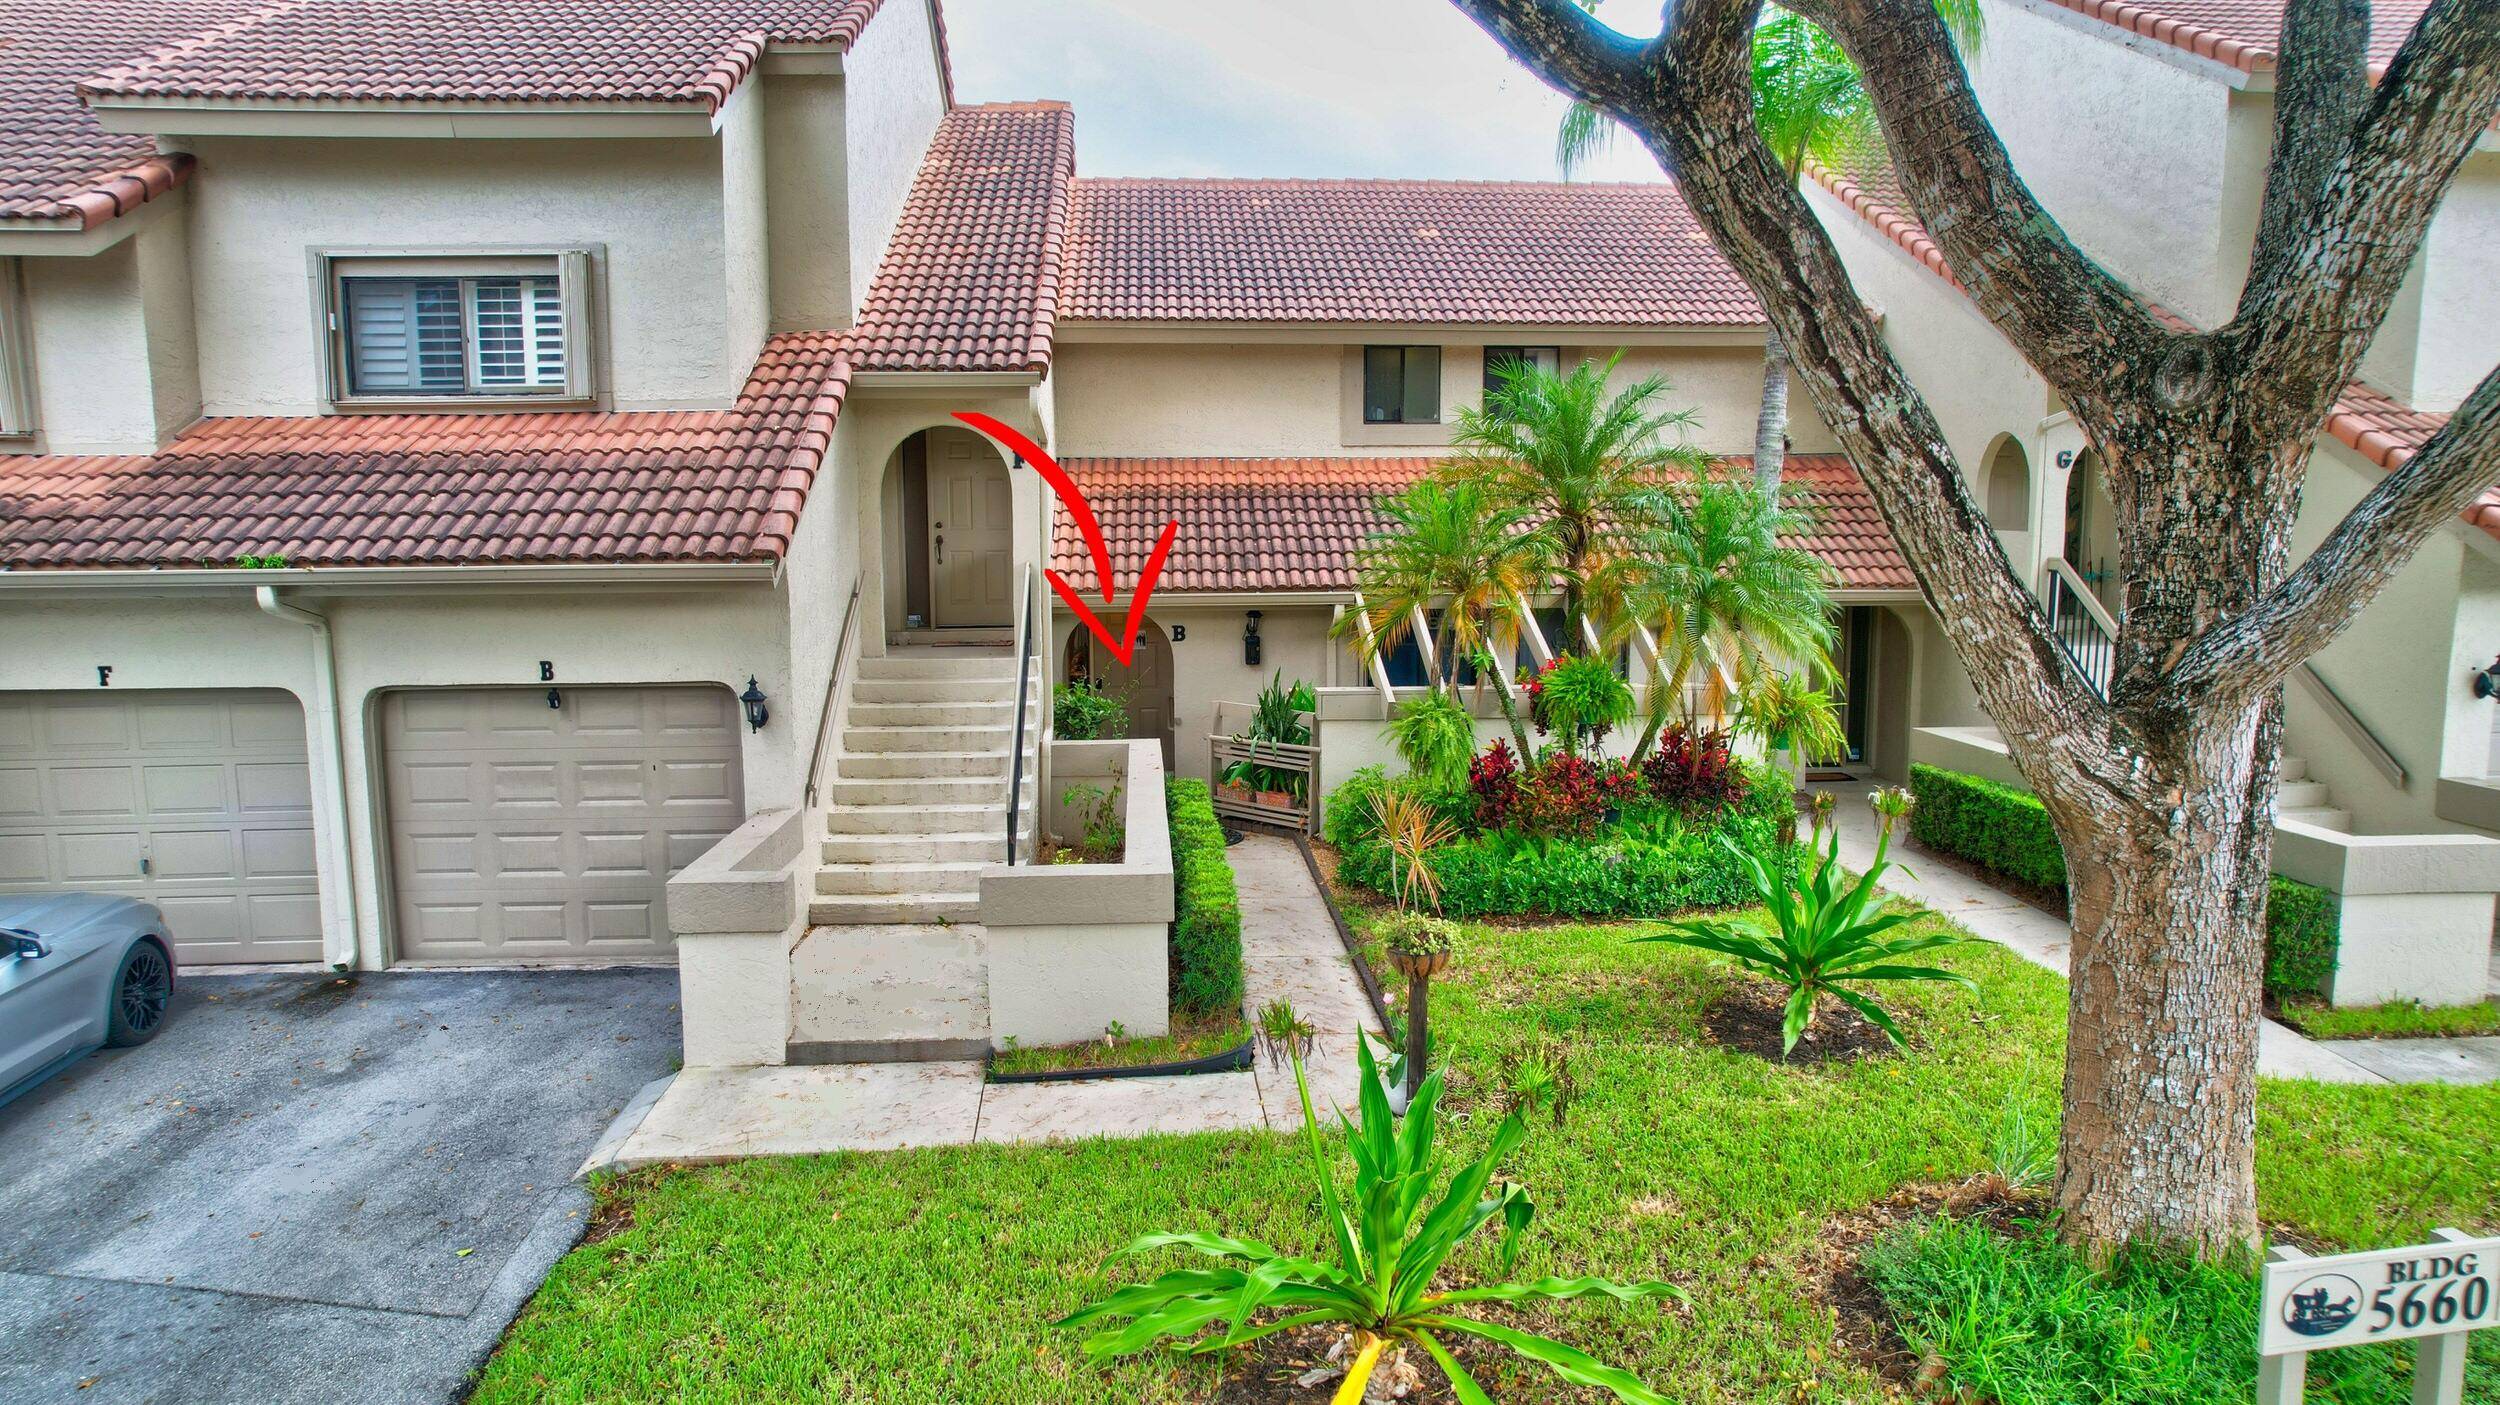 Impeccably renovated, spacious 2 BR den 1st floor coach home located in highly desirable Coach Houses in East Boca Raton offered turnkey with stylish furnishings.